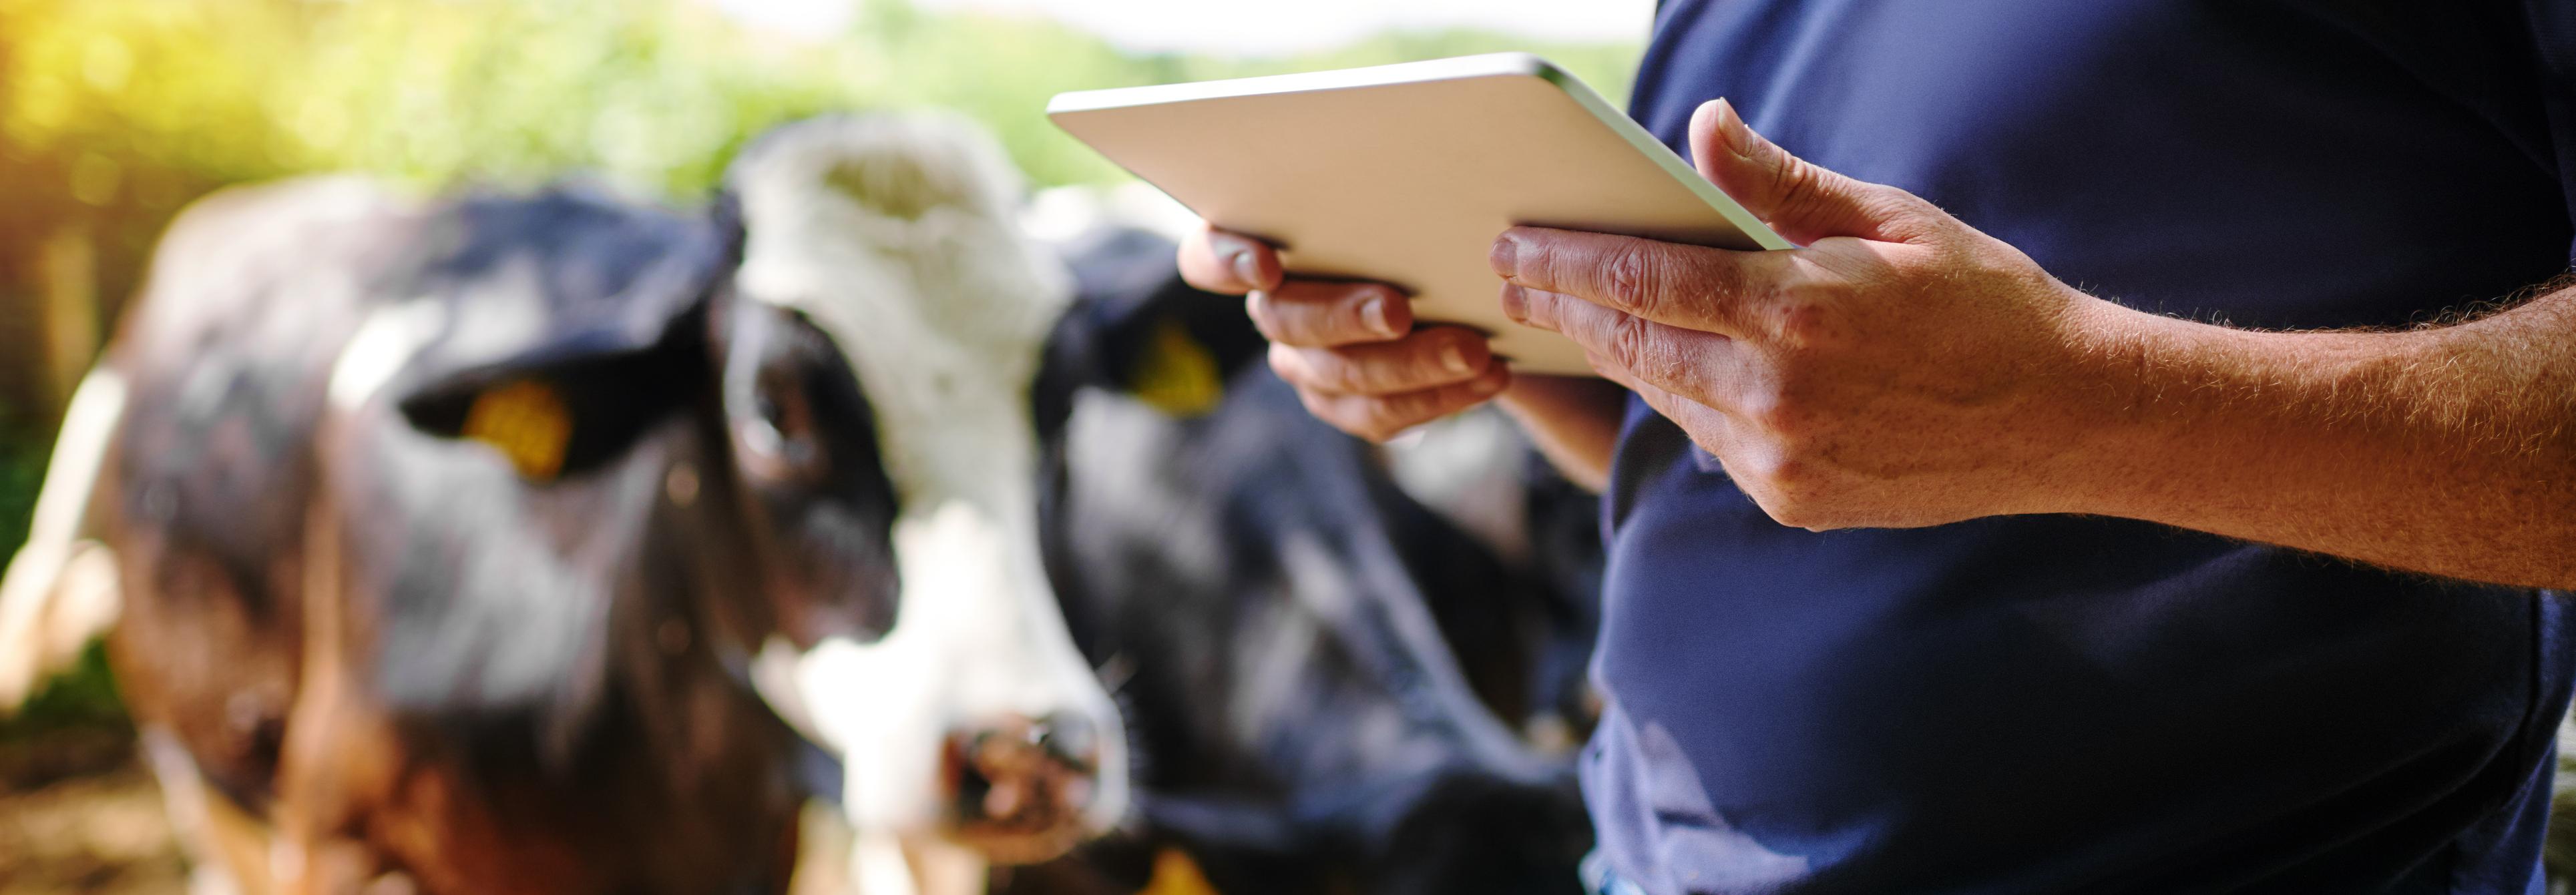 person using tablet computer in front of cows